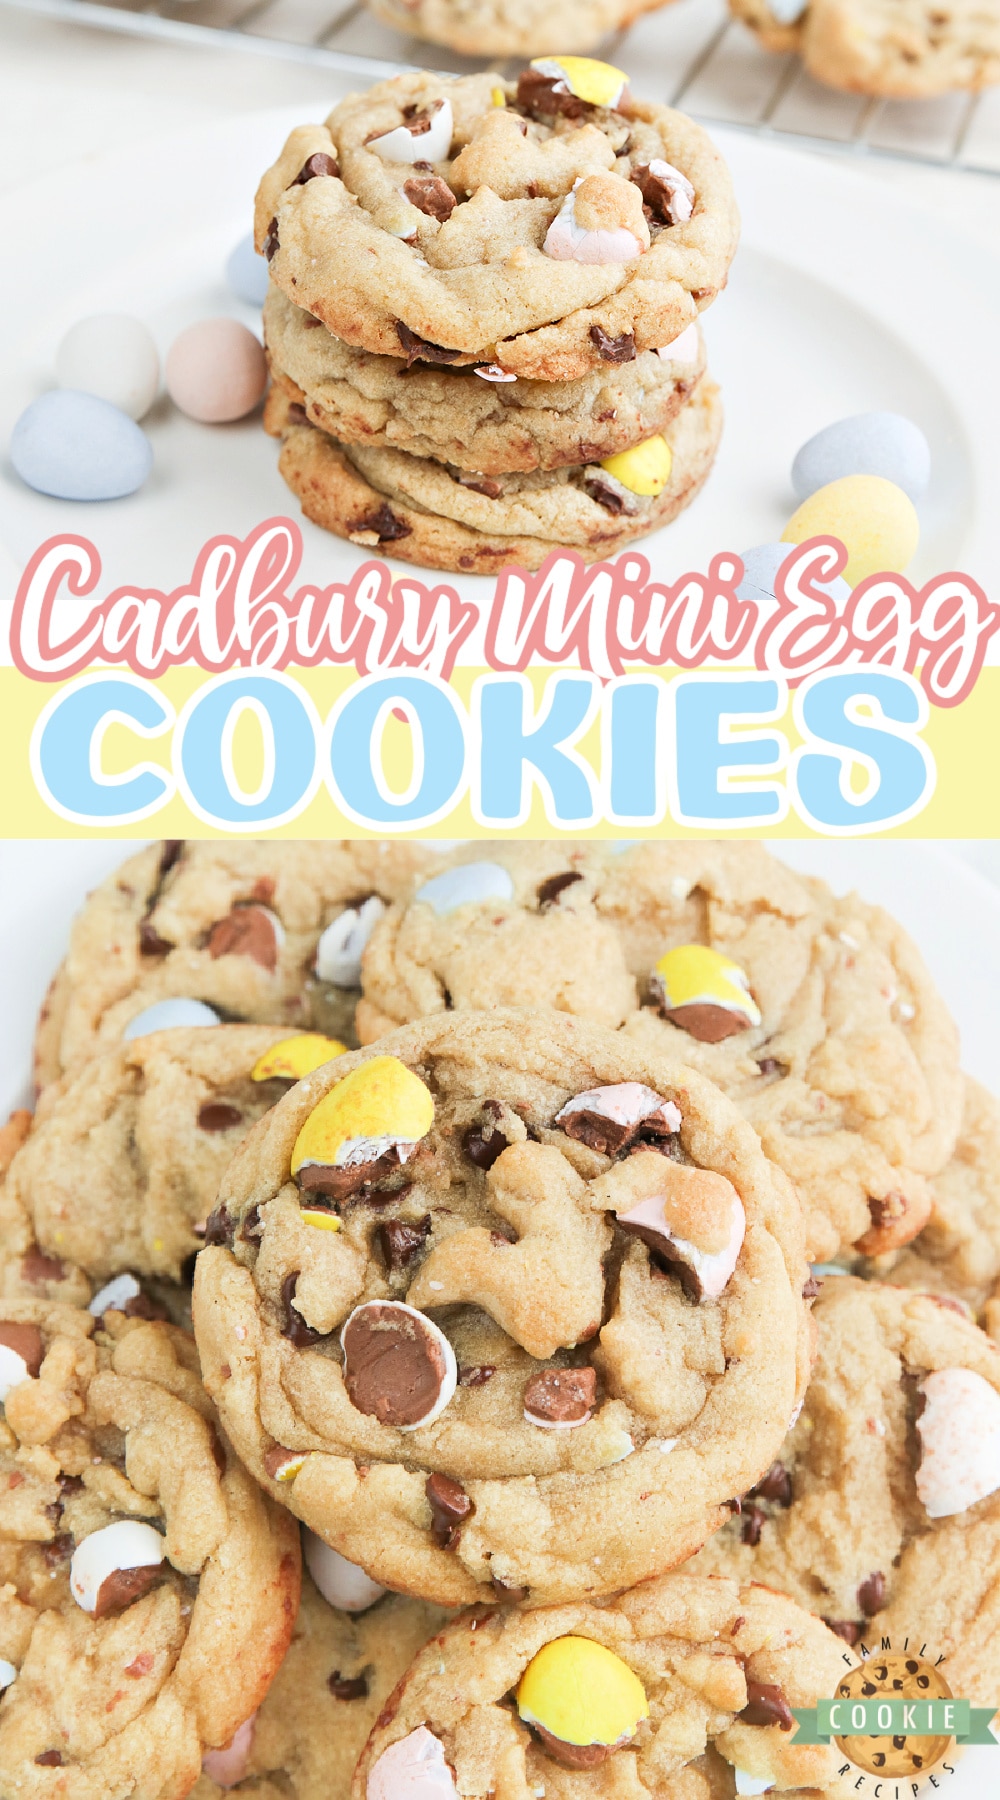 Cadbury Mini Egg Cookies are soft, thick and filled with your favorite Easter candy! Chewy cookie recipe made with chocolate chips and crushed Cadbury Mini Eggs. via @buttergirls